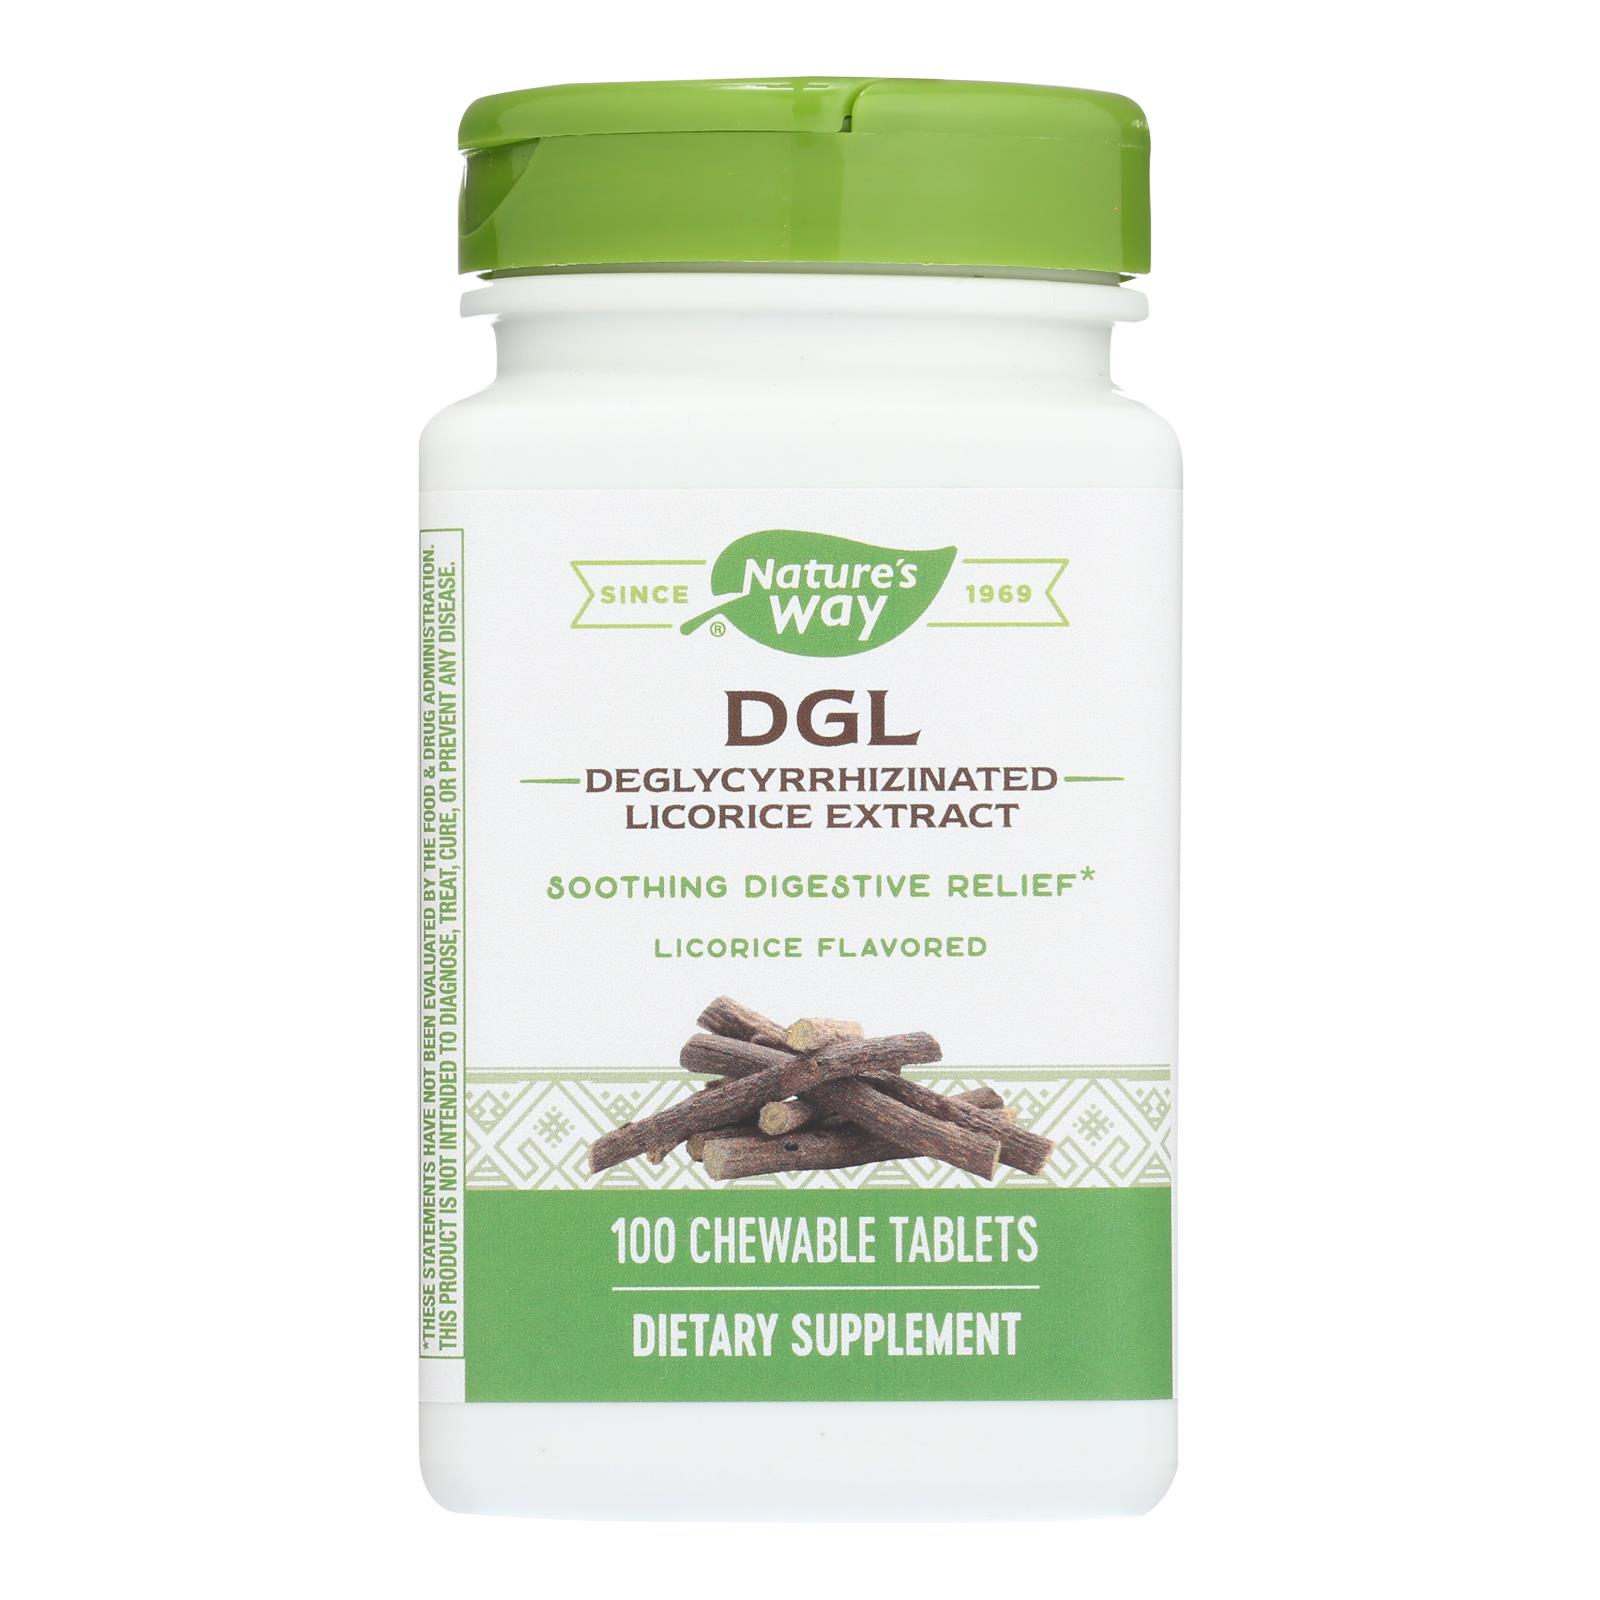 Enzymatic Therapy Dgl Chewable Digestion Tablets - 1 Each - 100 TAB